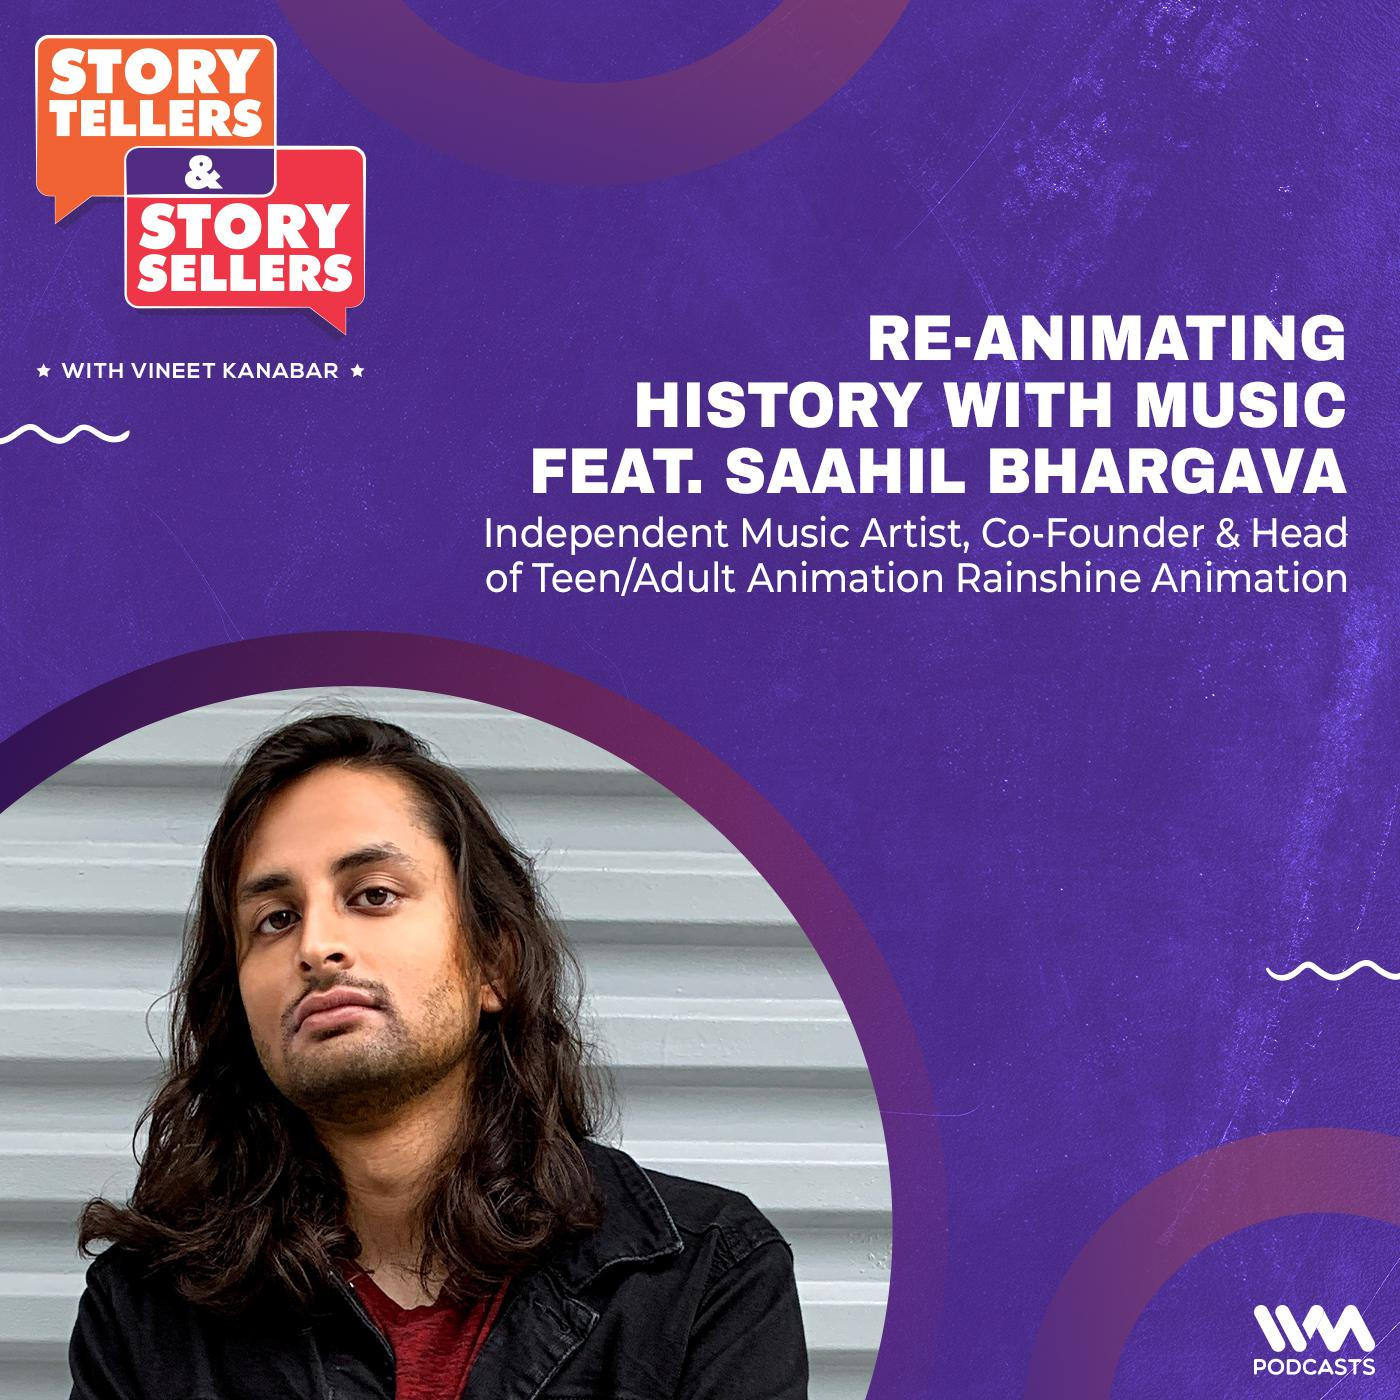 Saahil Bhargava on Re-animating History with Music